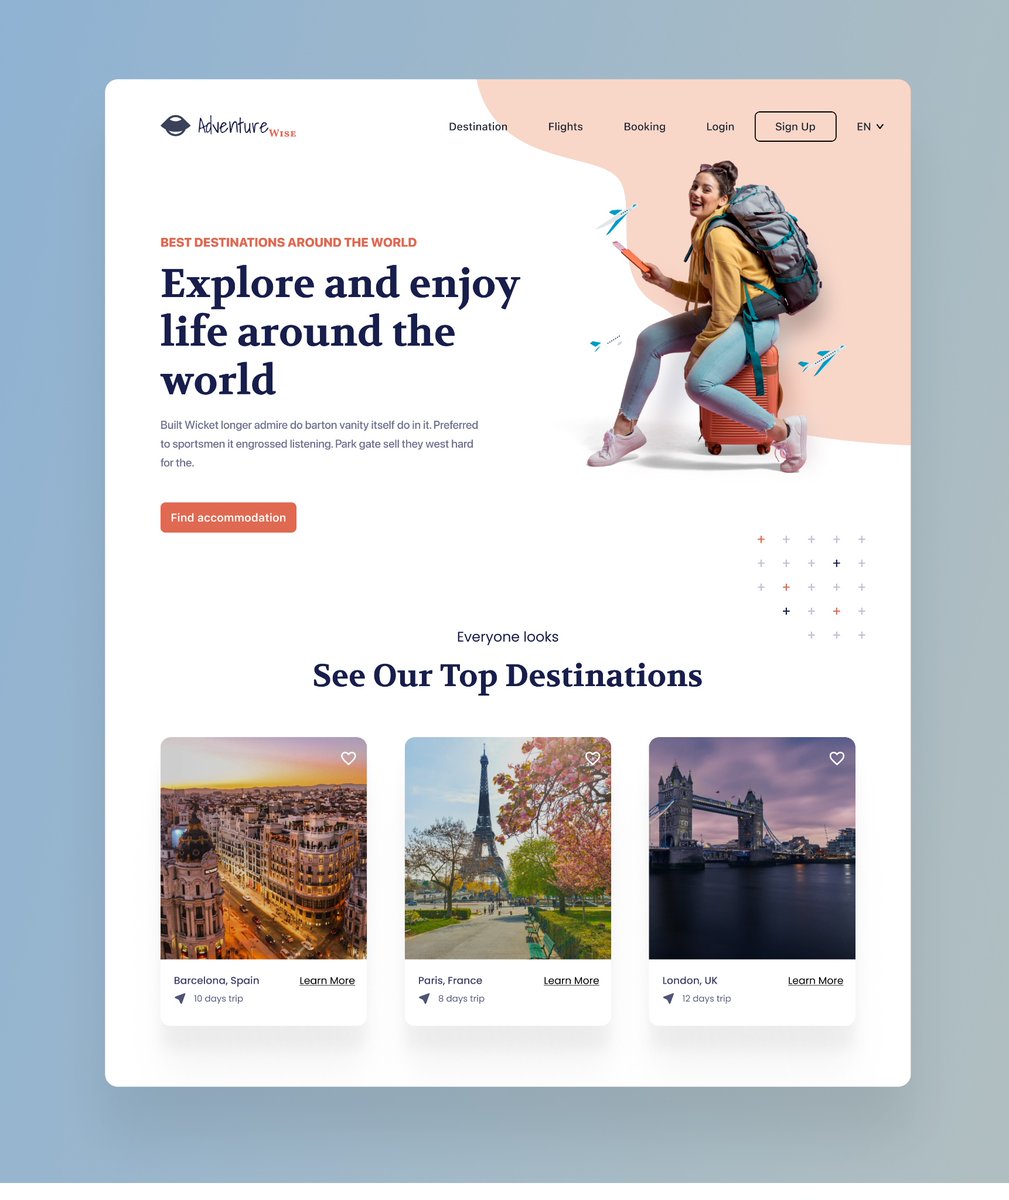 🎨 Today's challenge was a blast! I crafted a captivating landing page for a travel app 🗺️✈️ Can't wait to share more #UI creations! #DesignChallenge #TravelApp #DailyUI